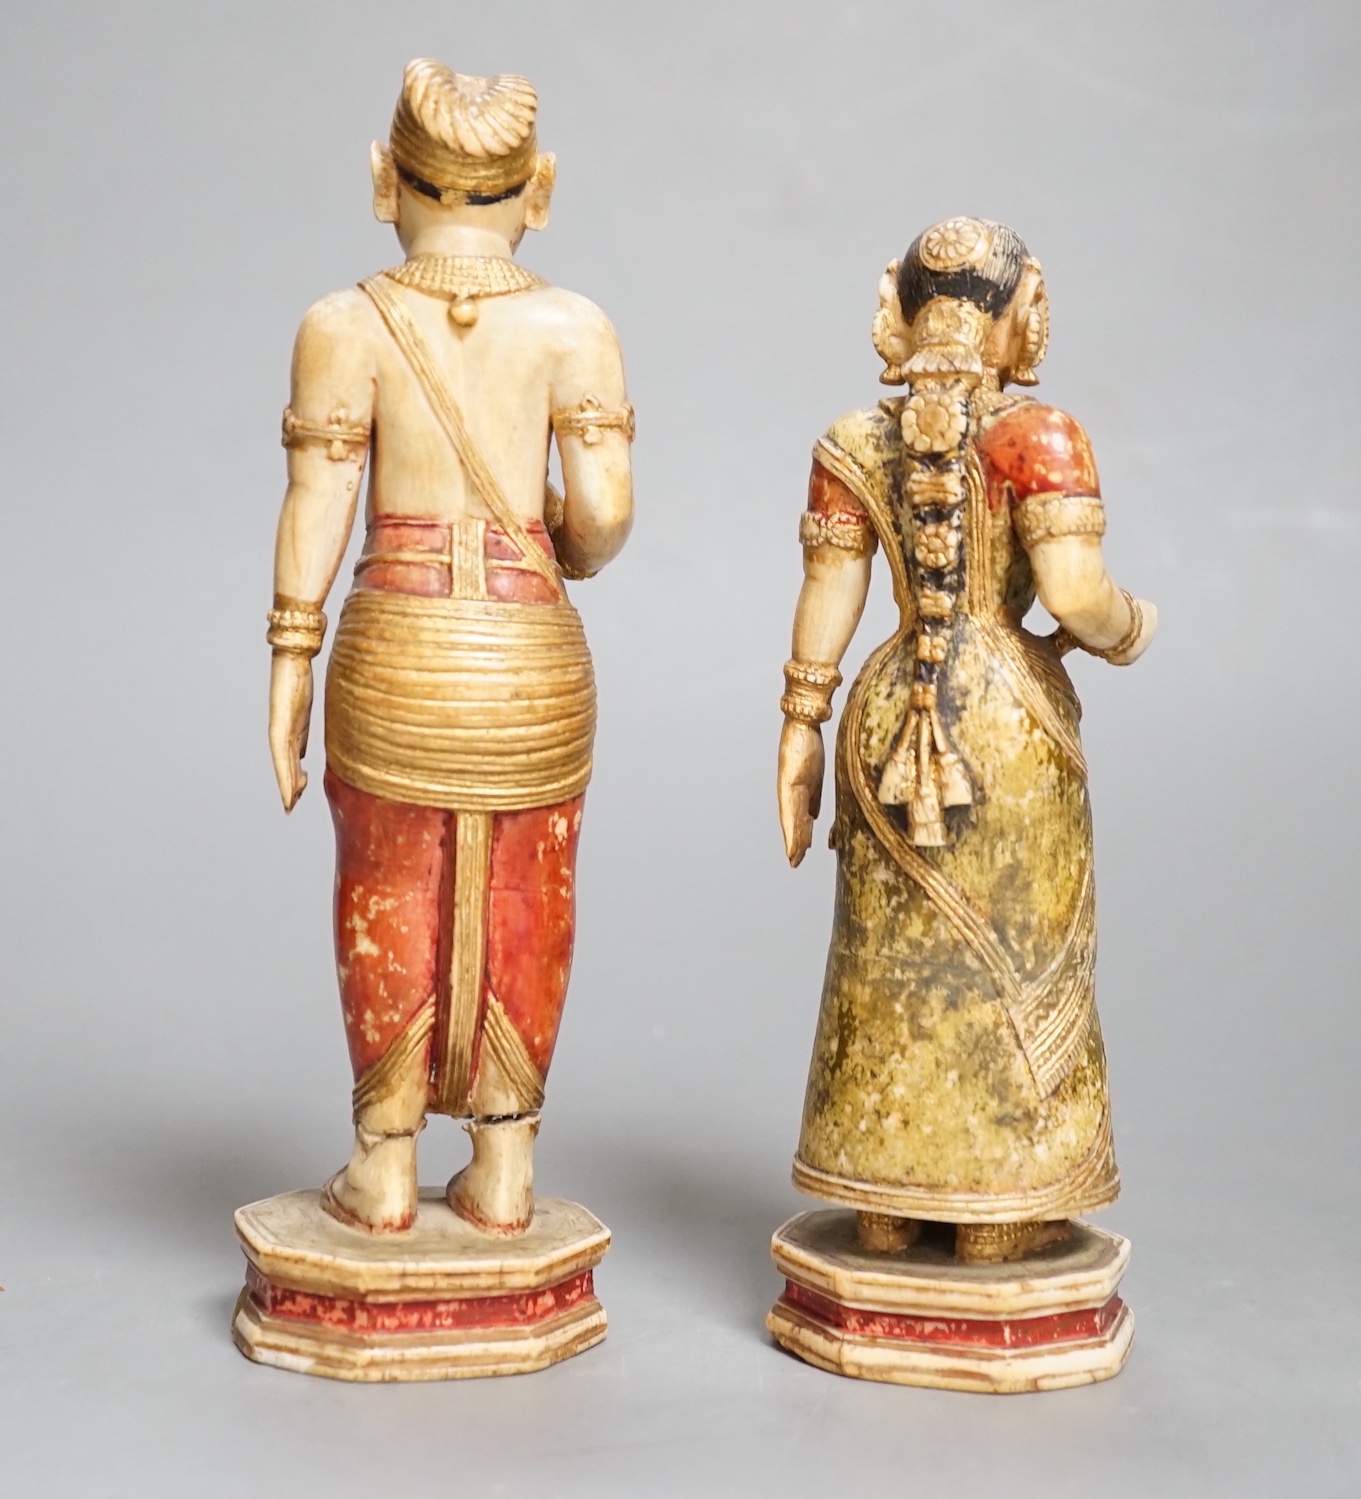 A pair of 18th century painted carved Indian ivory figures, male 7.6cm high female: 5.5cm high